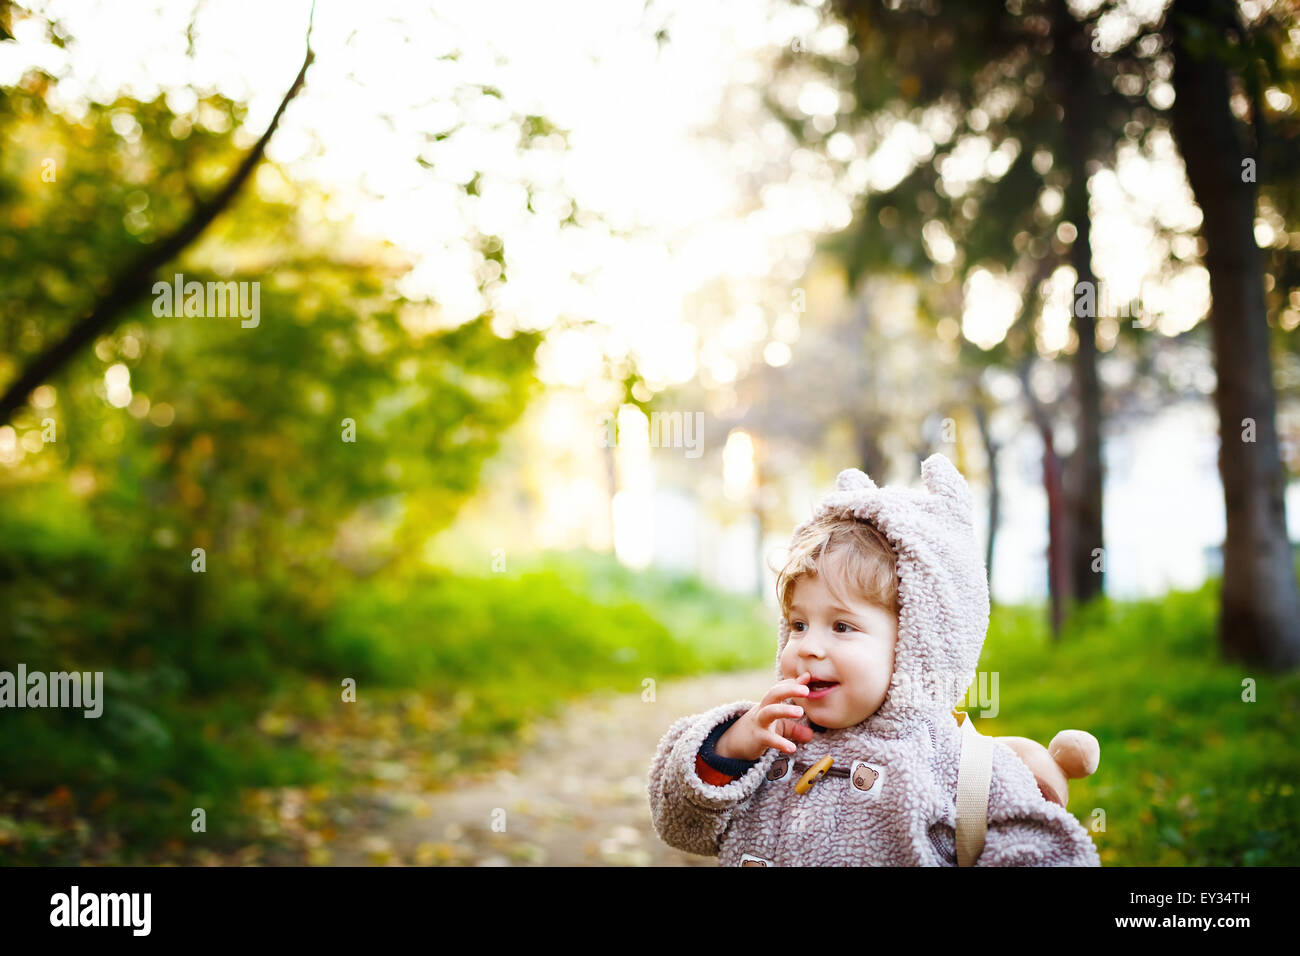 Funny Shy Little 2 year old Boy Giggling in the Park at the Sunset. Happy Childhood Concept. Space for your Text. Stock Photo